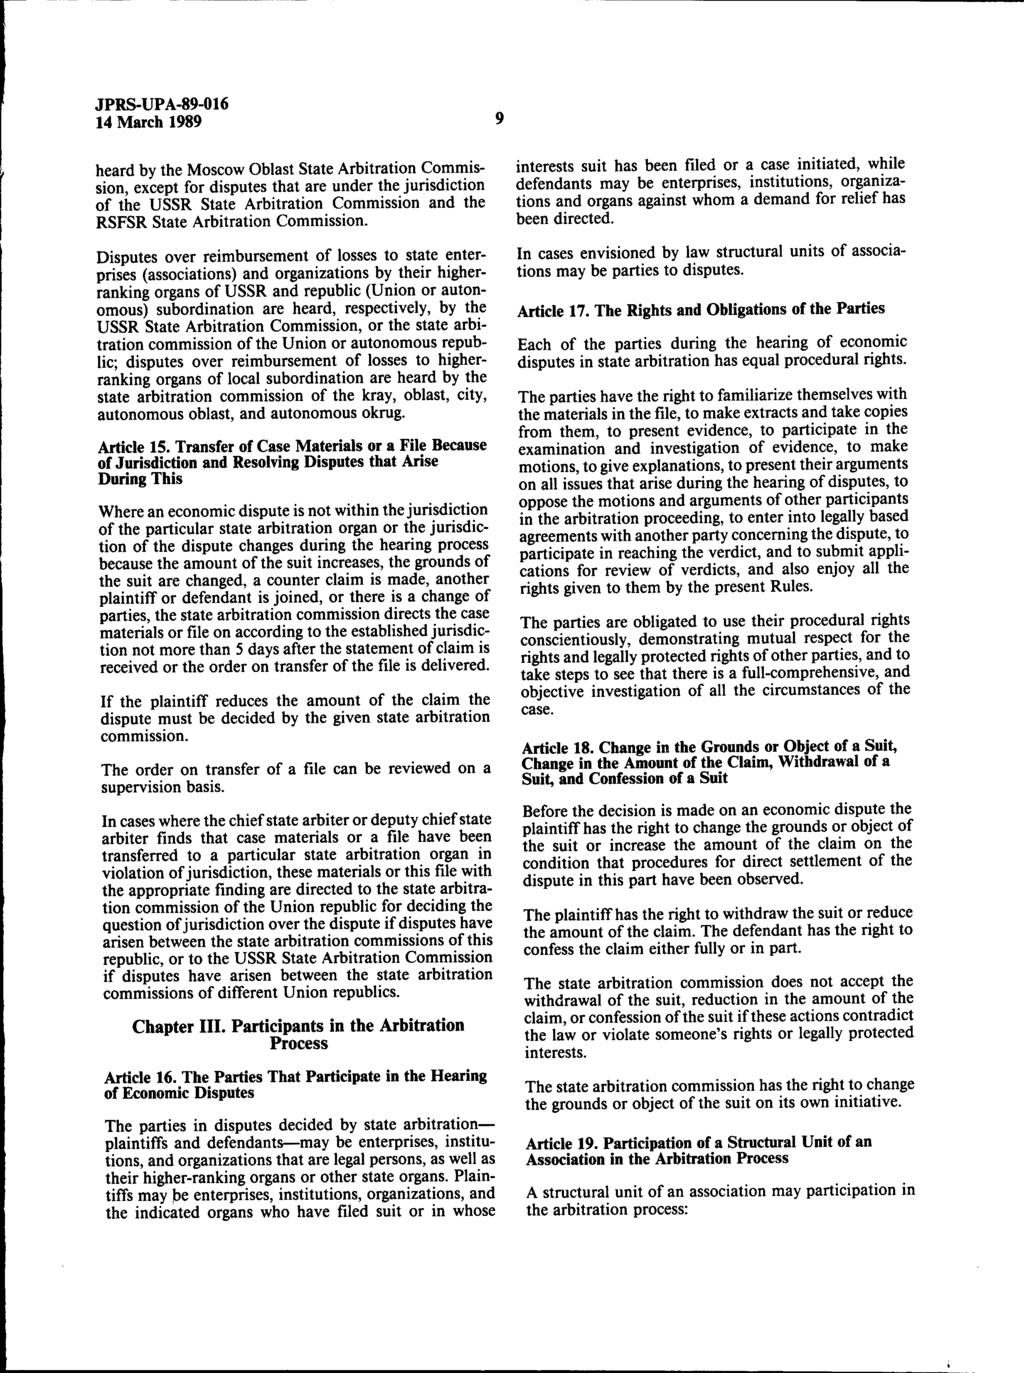 14 March 1989 heard by the Moscow Oblast State Arbitration Commission, except for disputes that are under the jurisdiction of the USSR State Arbitration Commission and the RSFSR State Arbitration